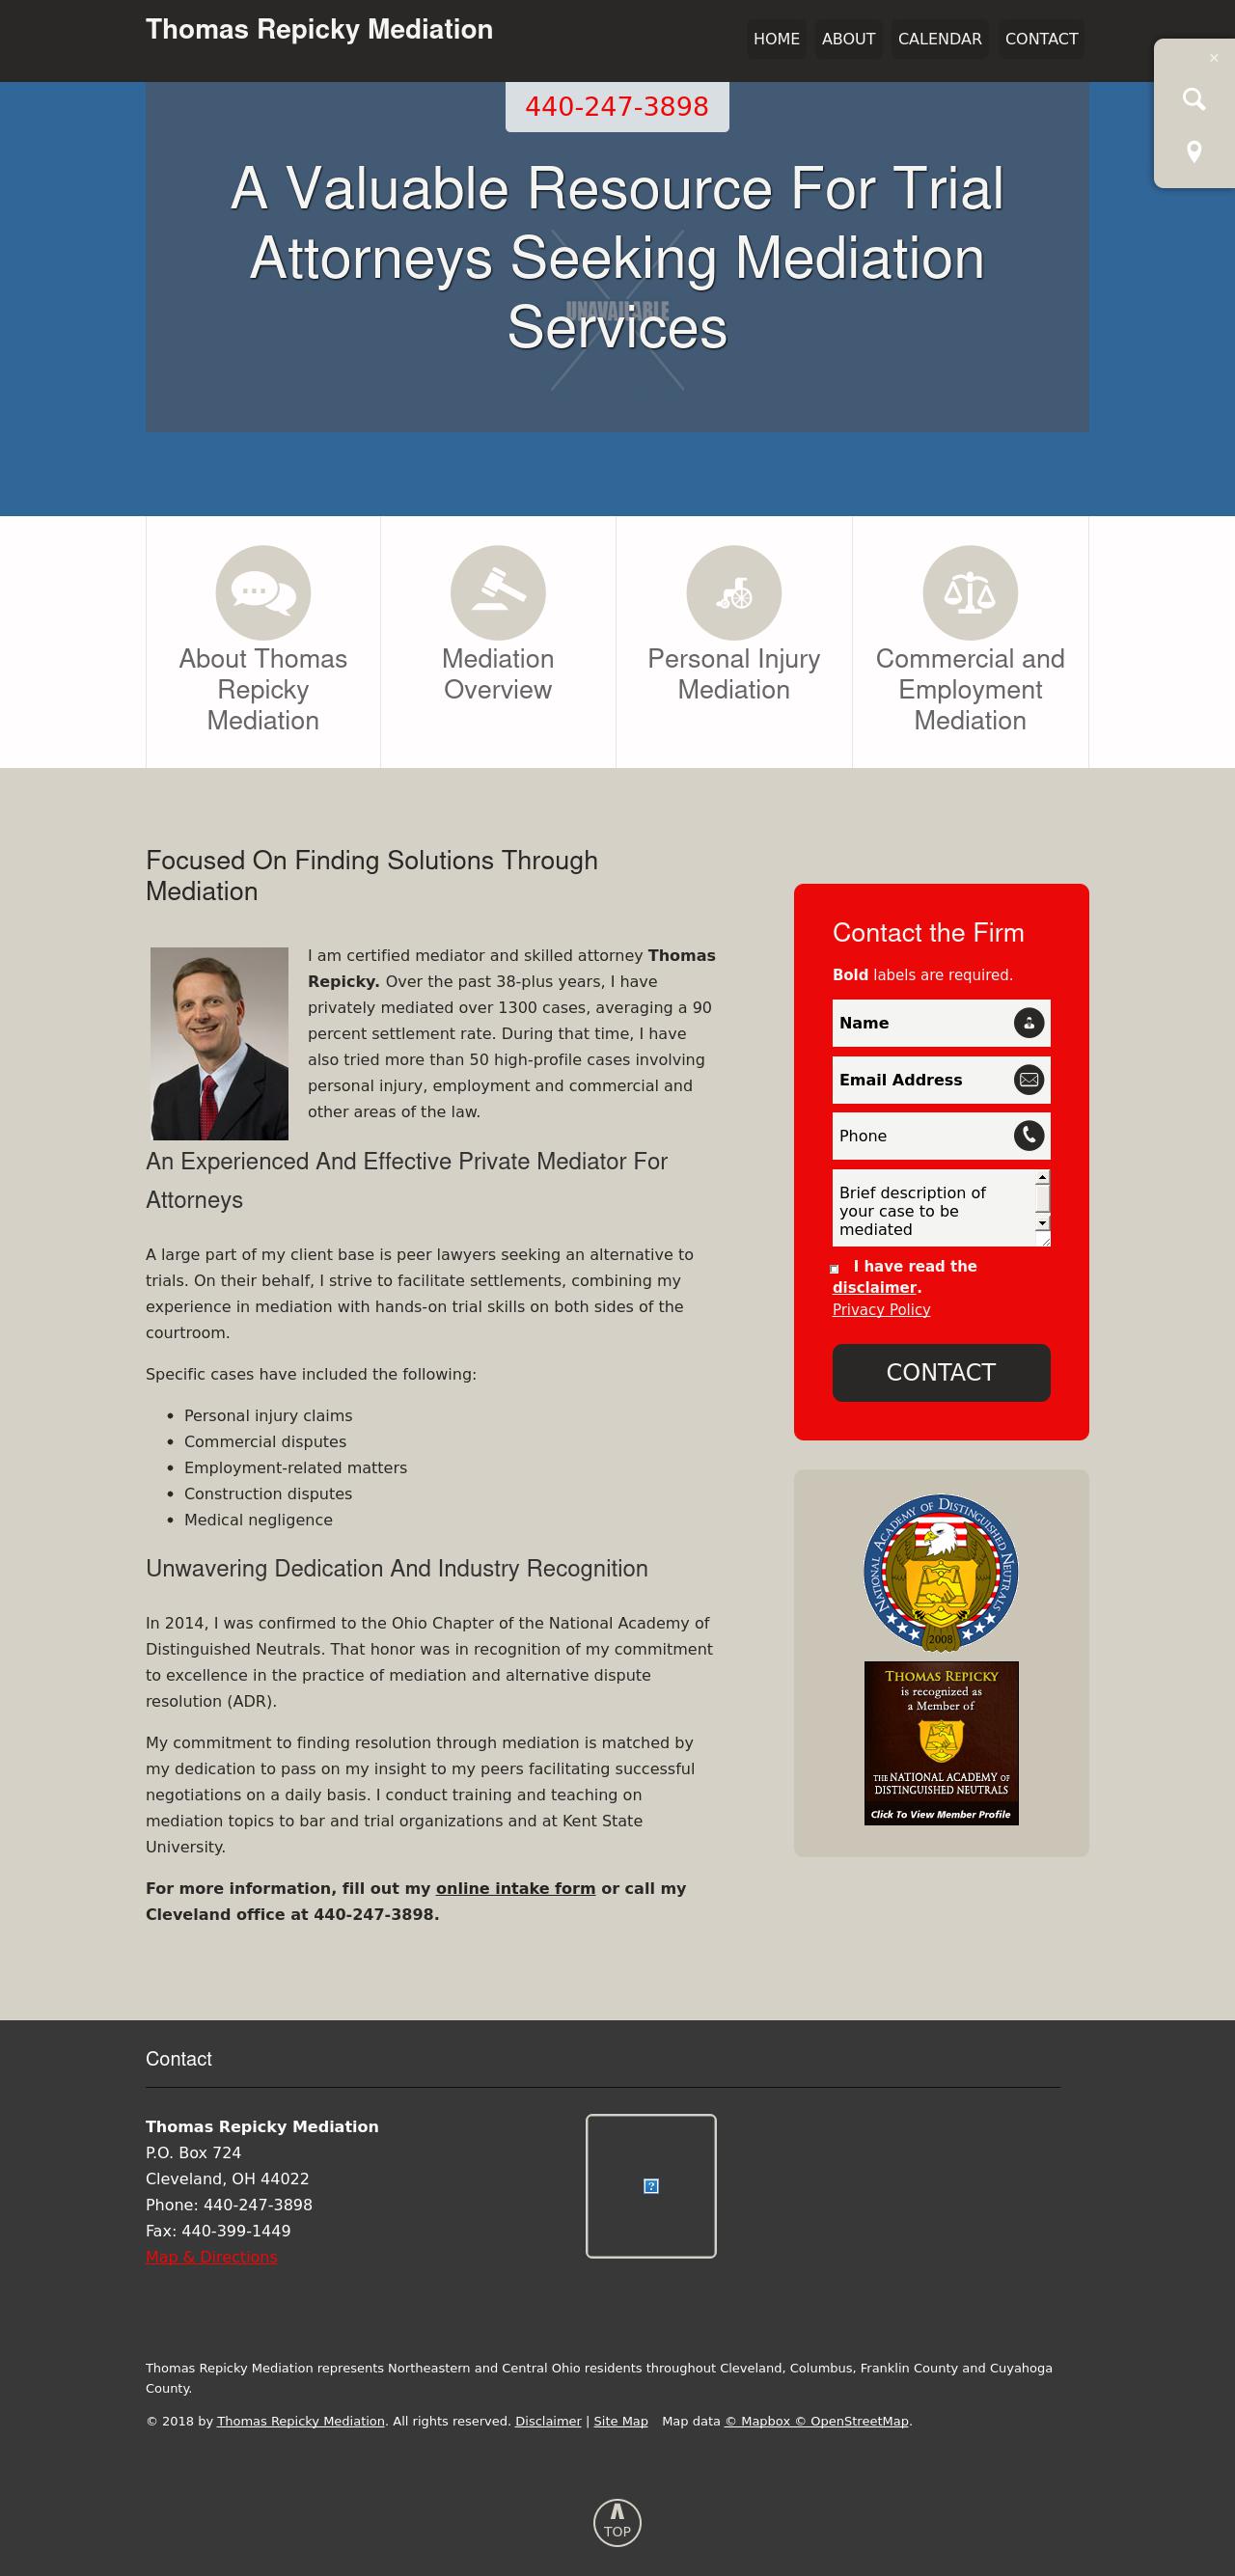 Thomas Repicky Mediation - Cleveland OH Lawyers